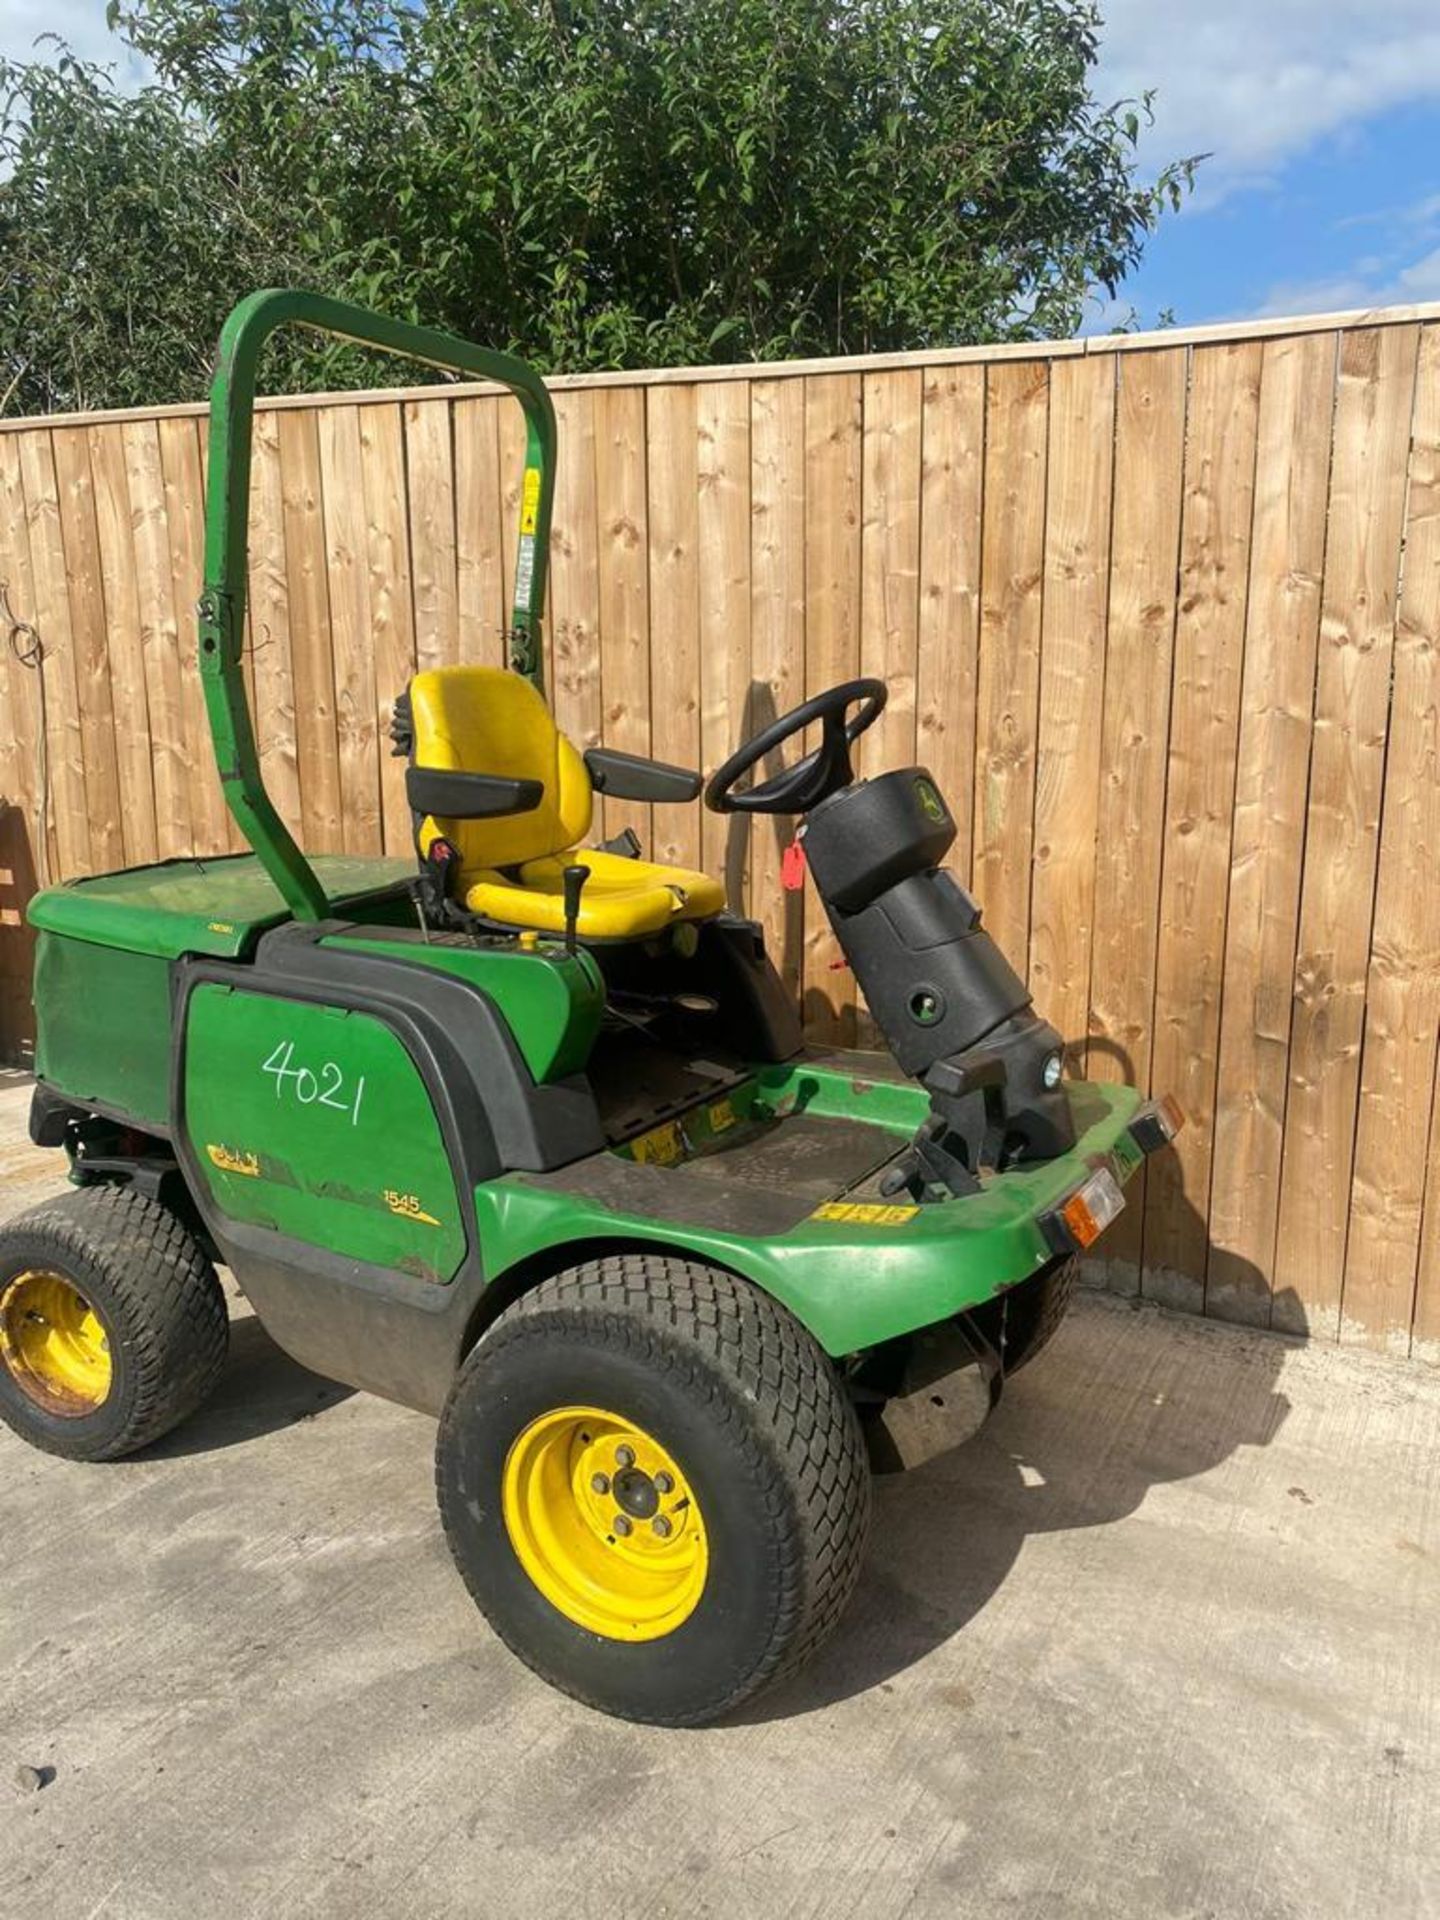 2013 "63" JOHN DEERE 1545 OUTFRONT MOWER LOCATION: NORTH YORKSHIRE - Image 6 of 8